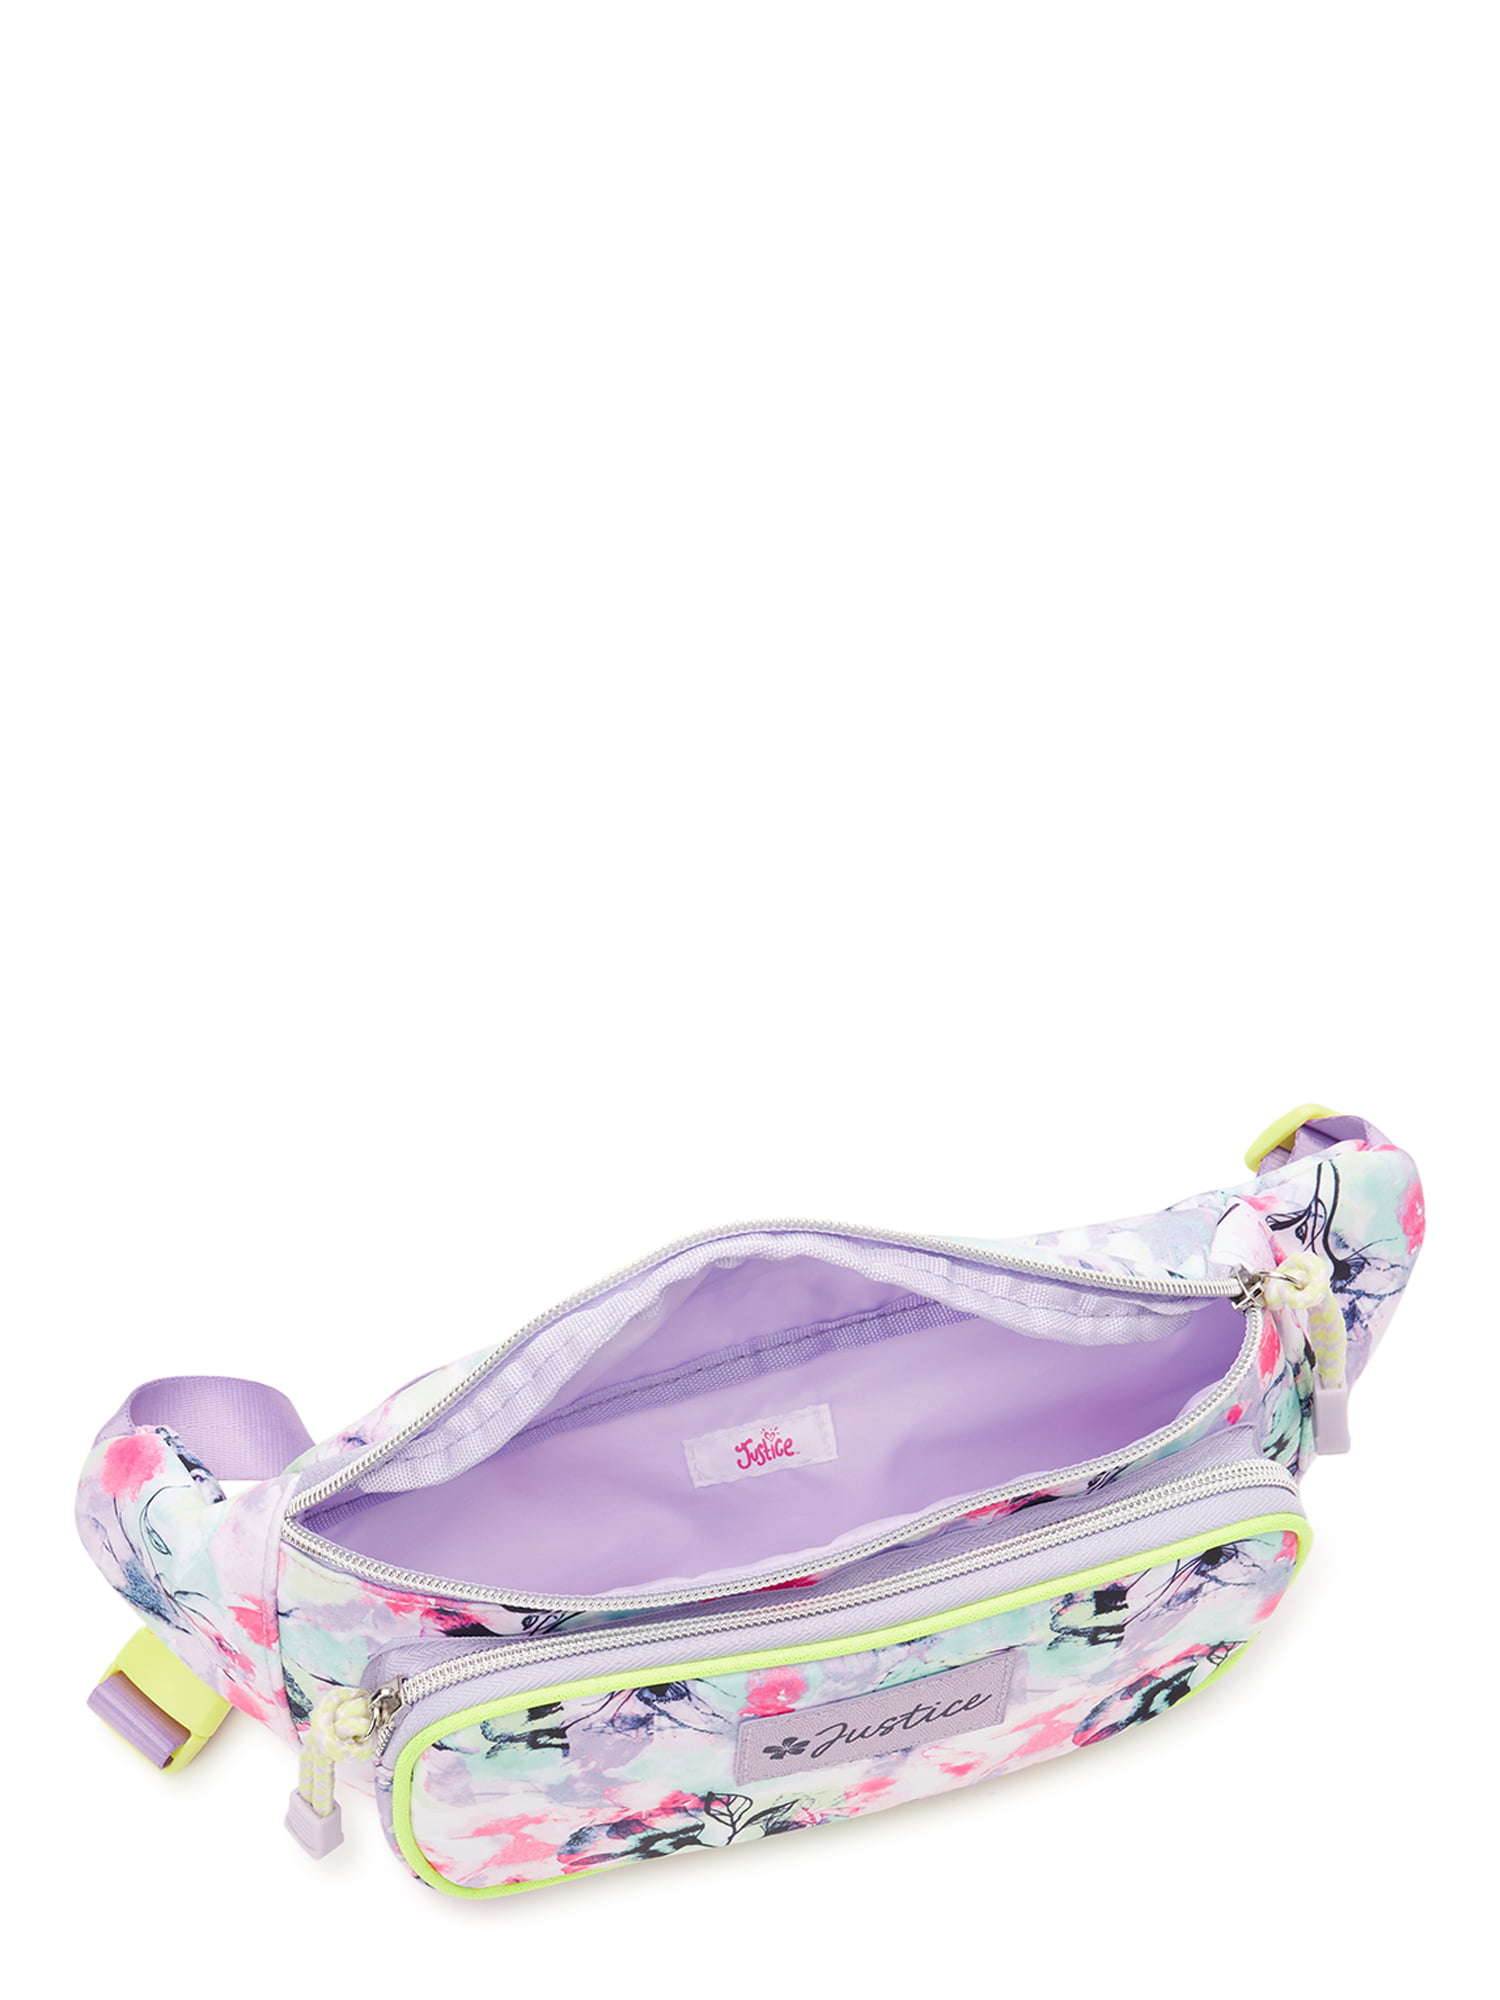 Justice Girls Pink Floral Print Fanny Pack